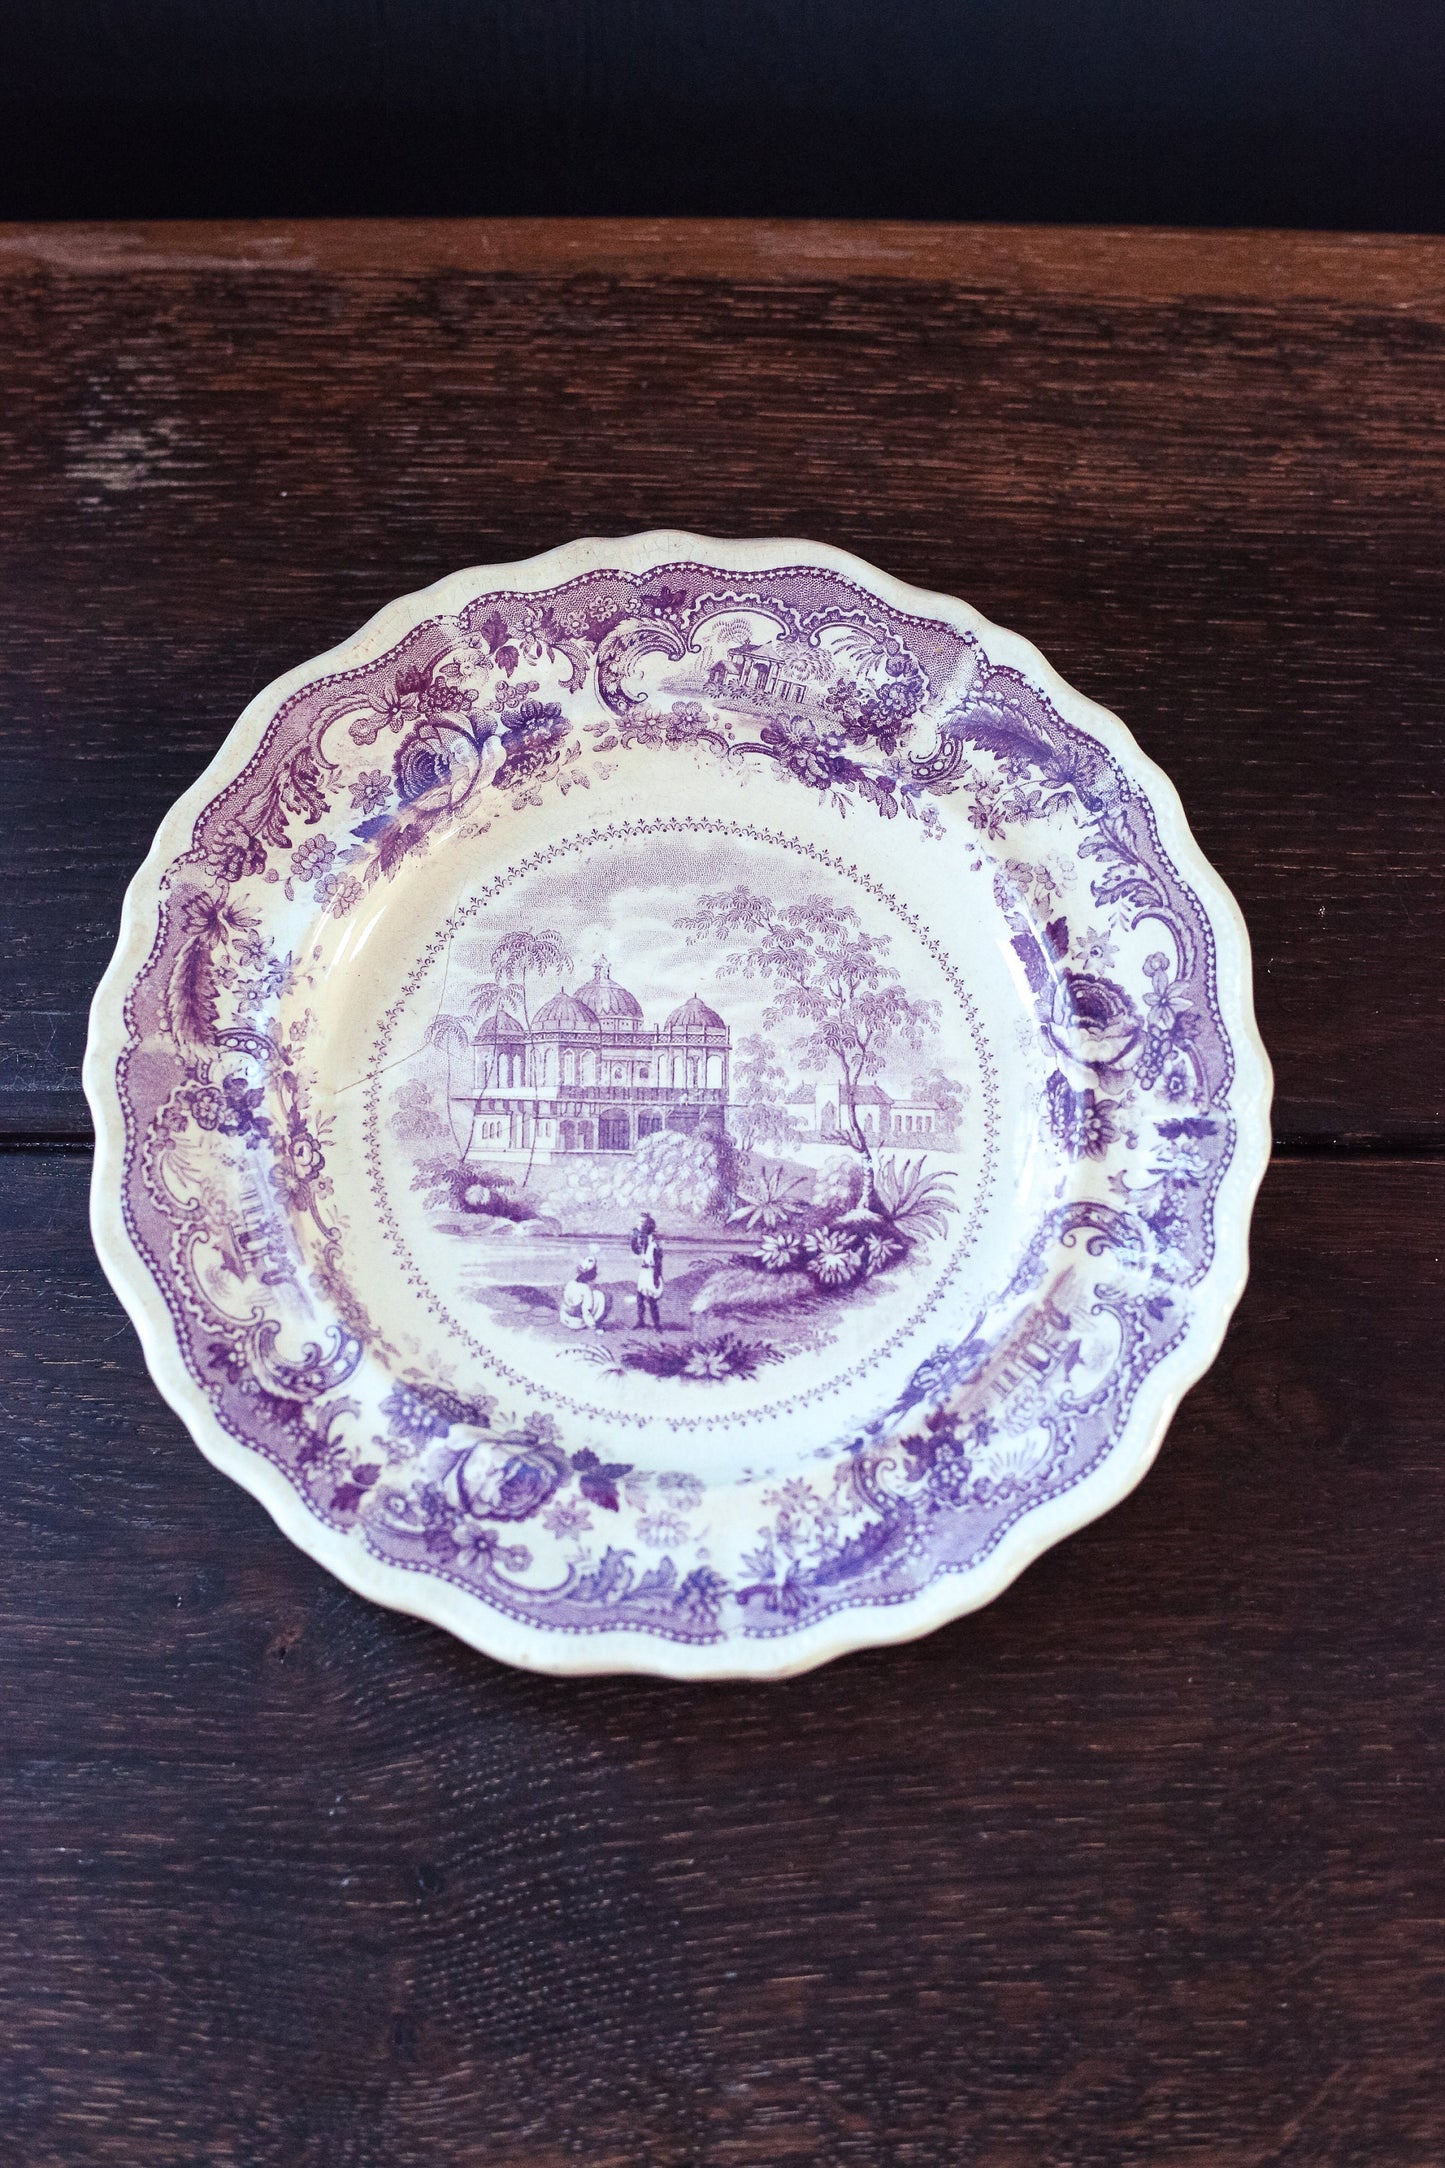 1800's Mulberry Transferware Ironstone Plate - Antique Purple Indian Temples Toile Plate with Damage/Crack